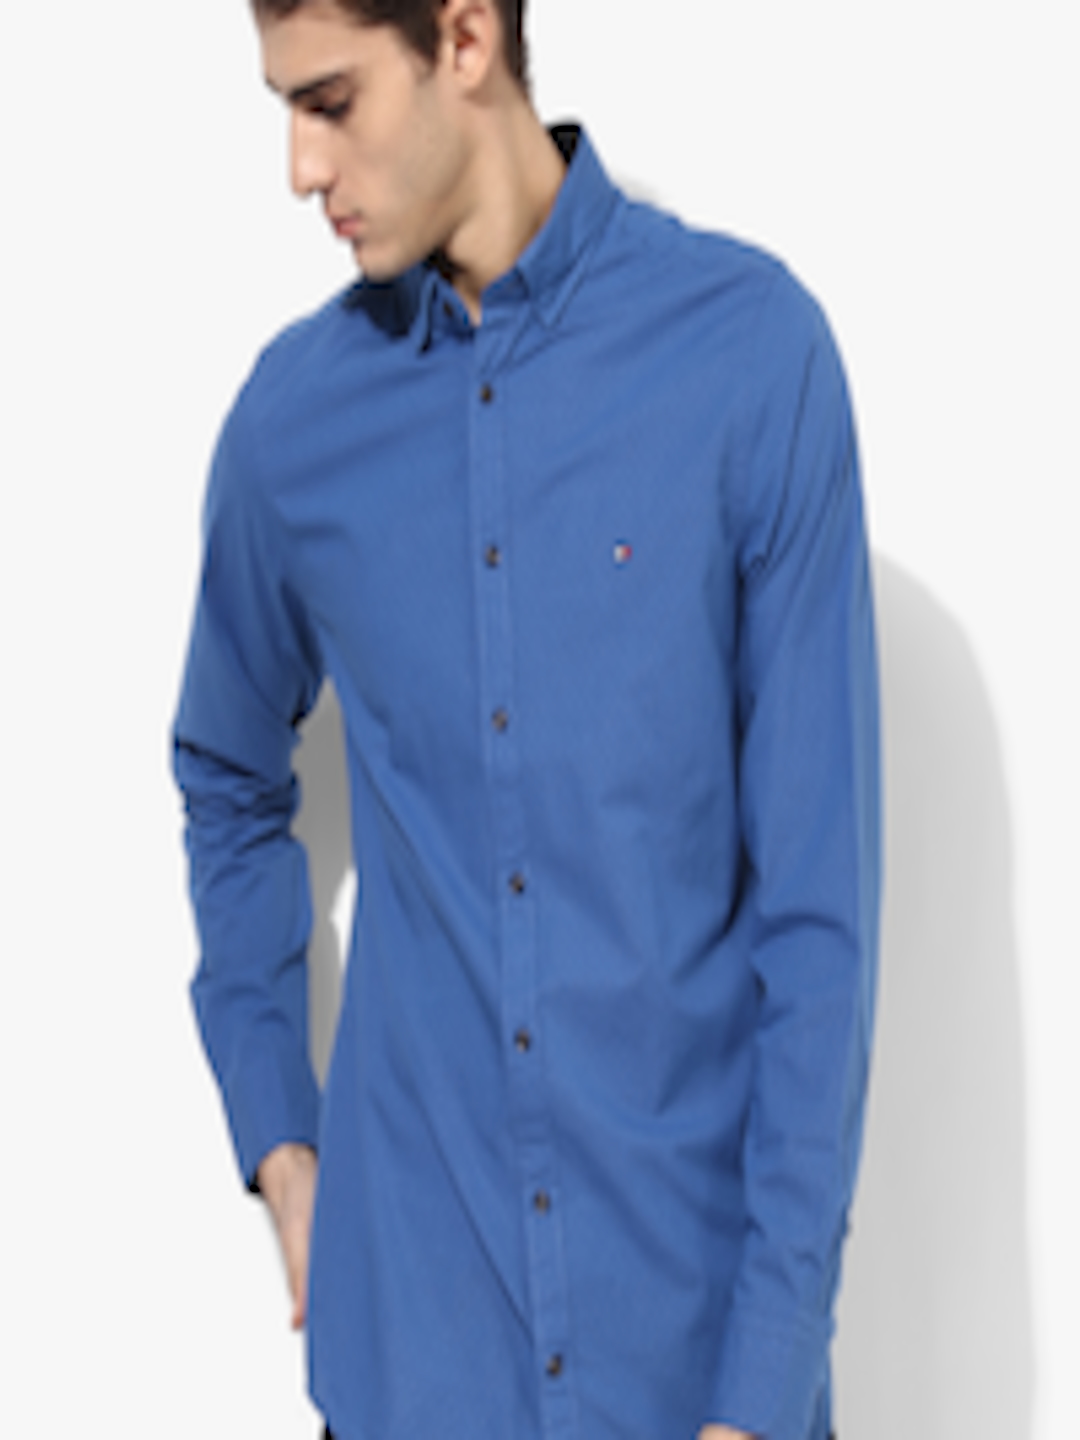 Buy Blue Textured Slim Fit Casual Shirt - Shirts for Men 8227989 | Myntra